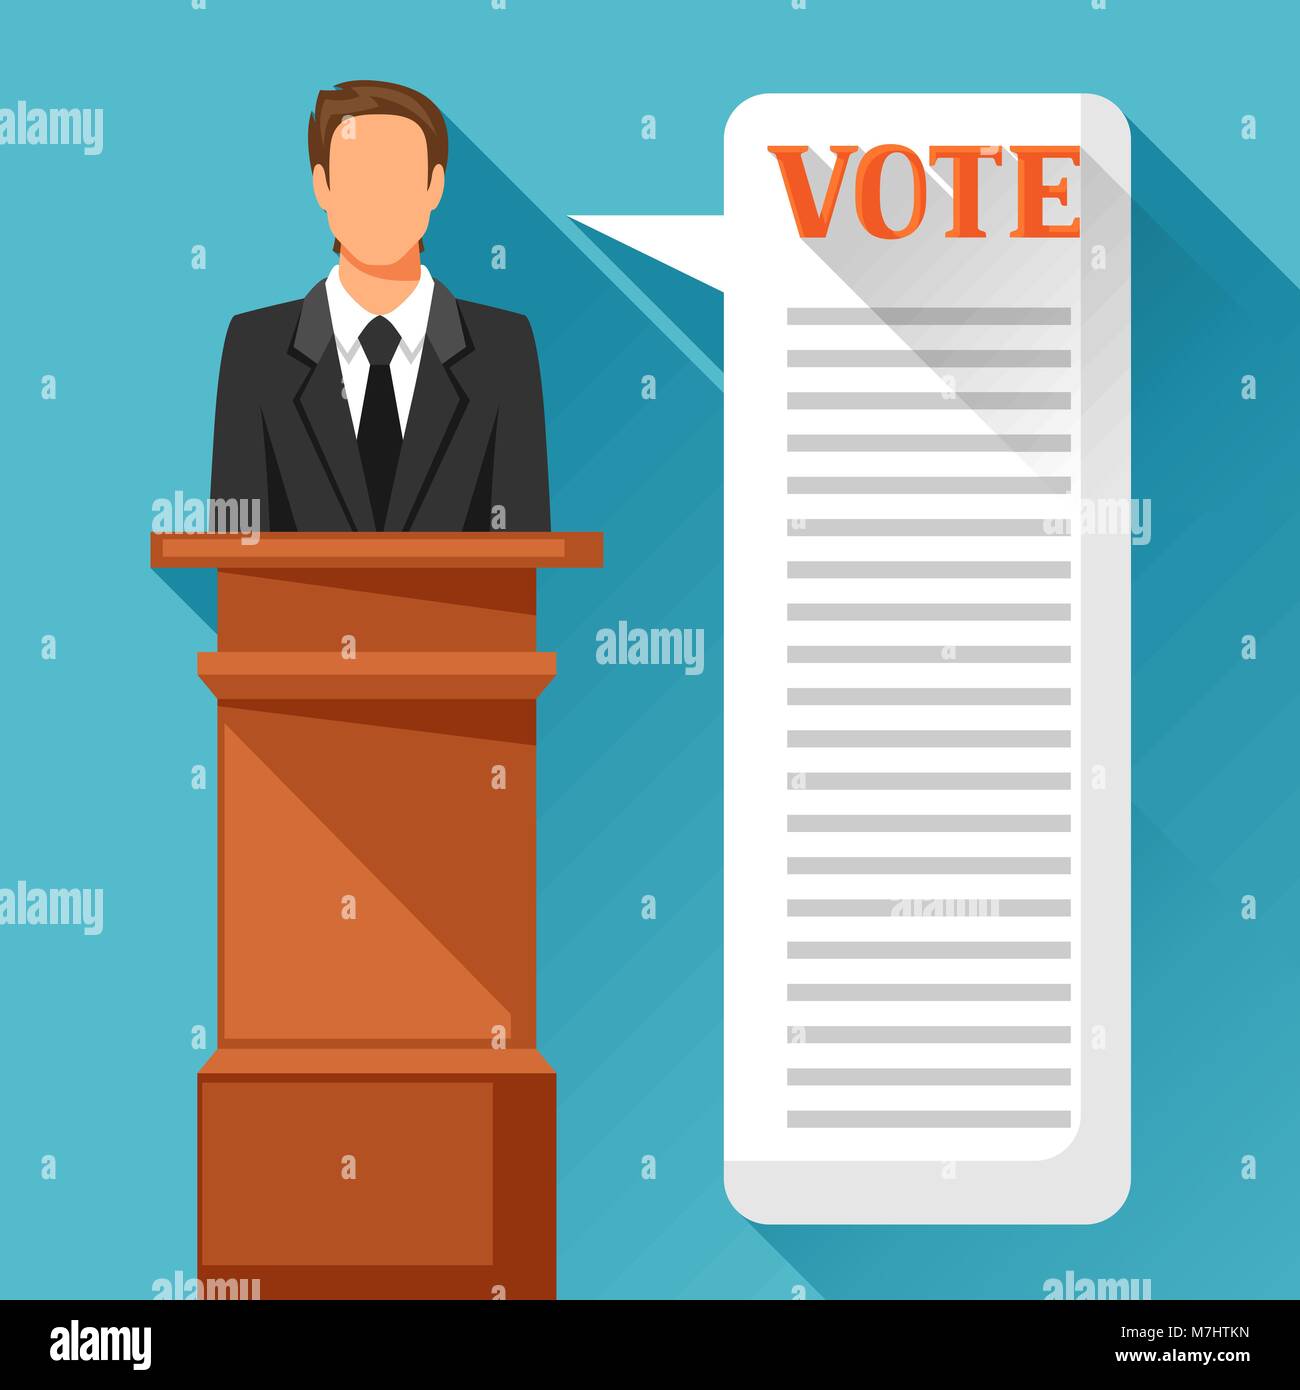 Candidate of party involved in debate. Political elections illustration for banners, web sites, banners and flayers Stock Vector